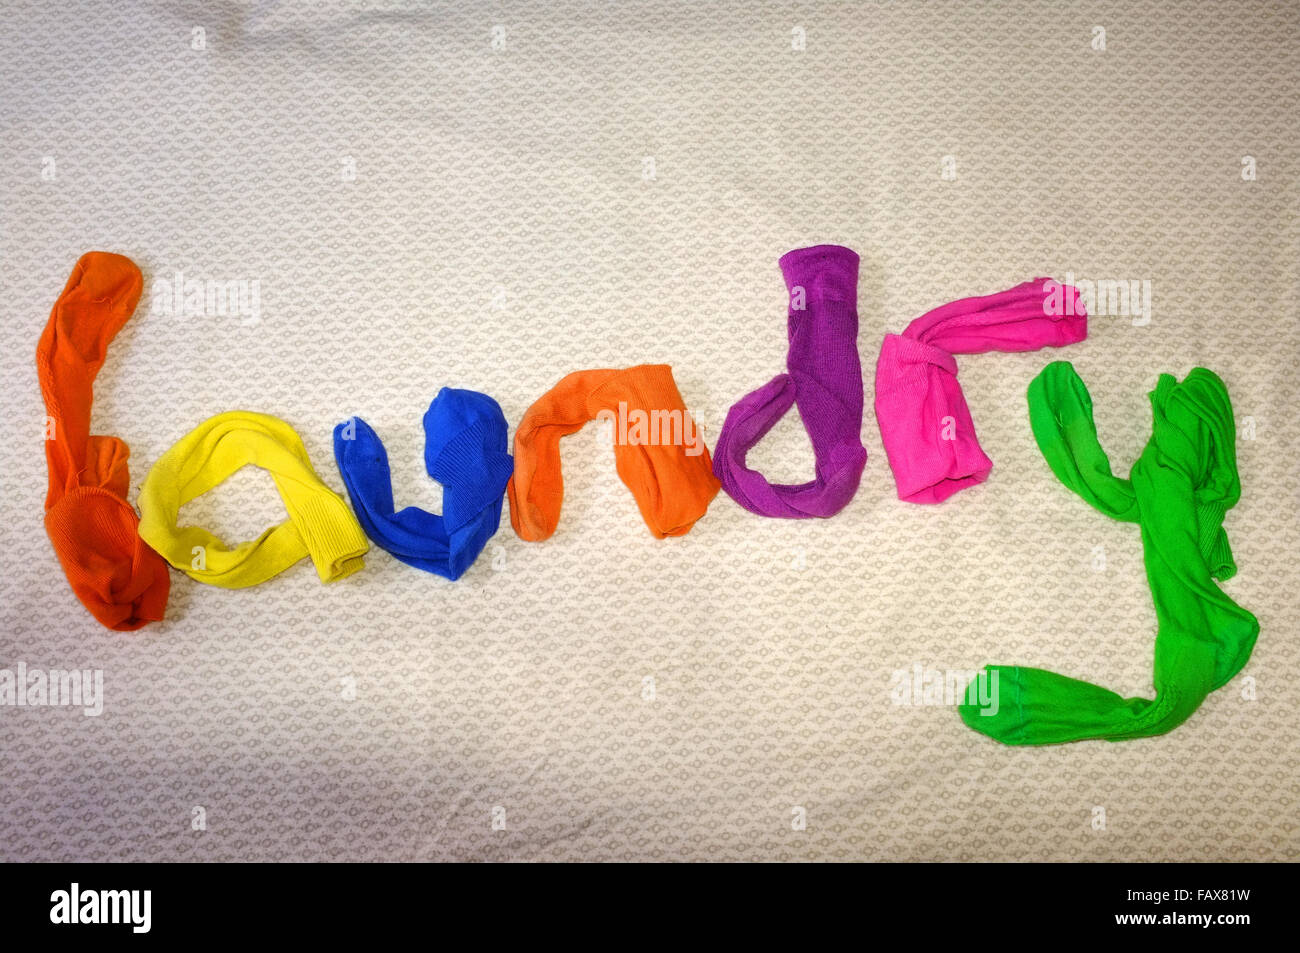 The word laundry made out of colourful socks laying on a duvet cover. Stock Photo